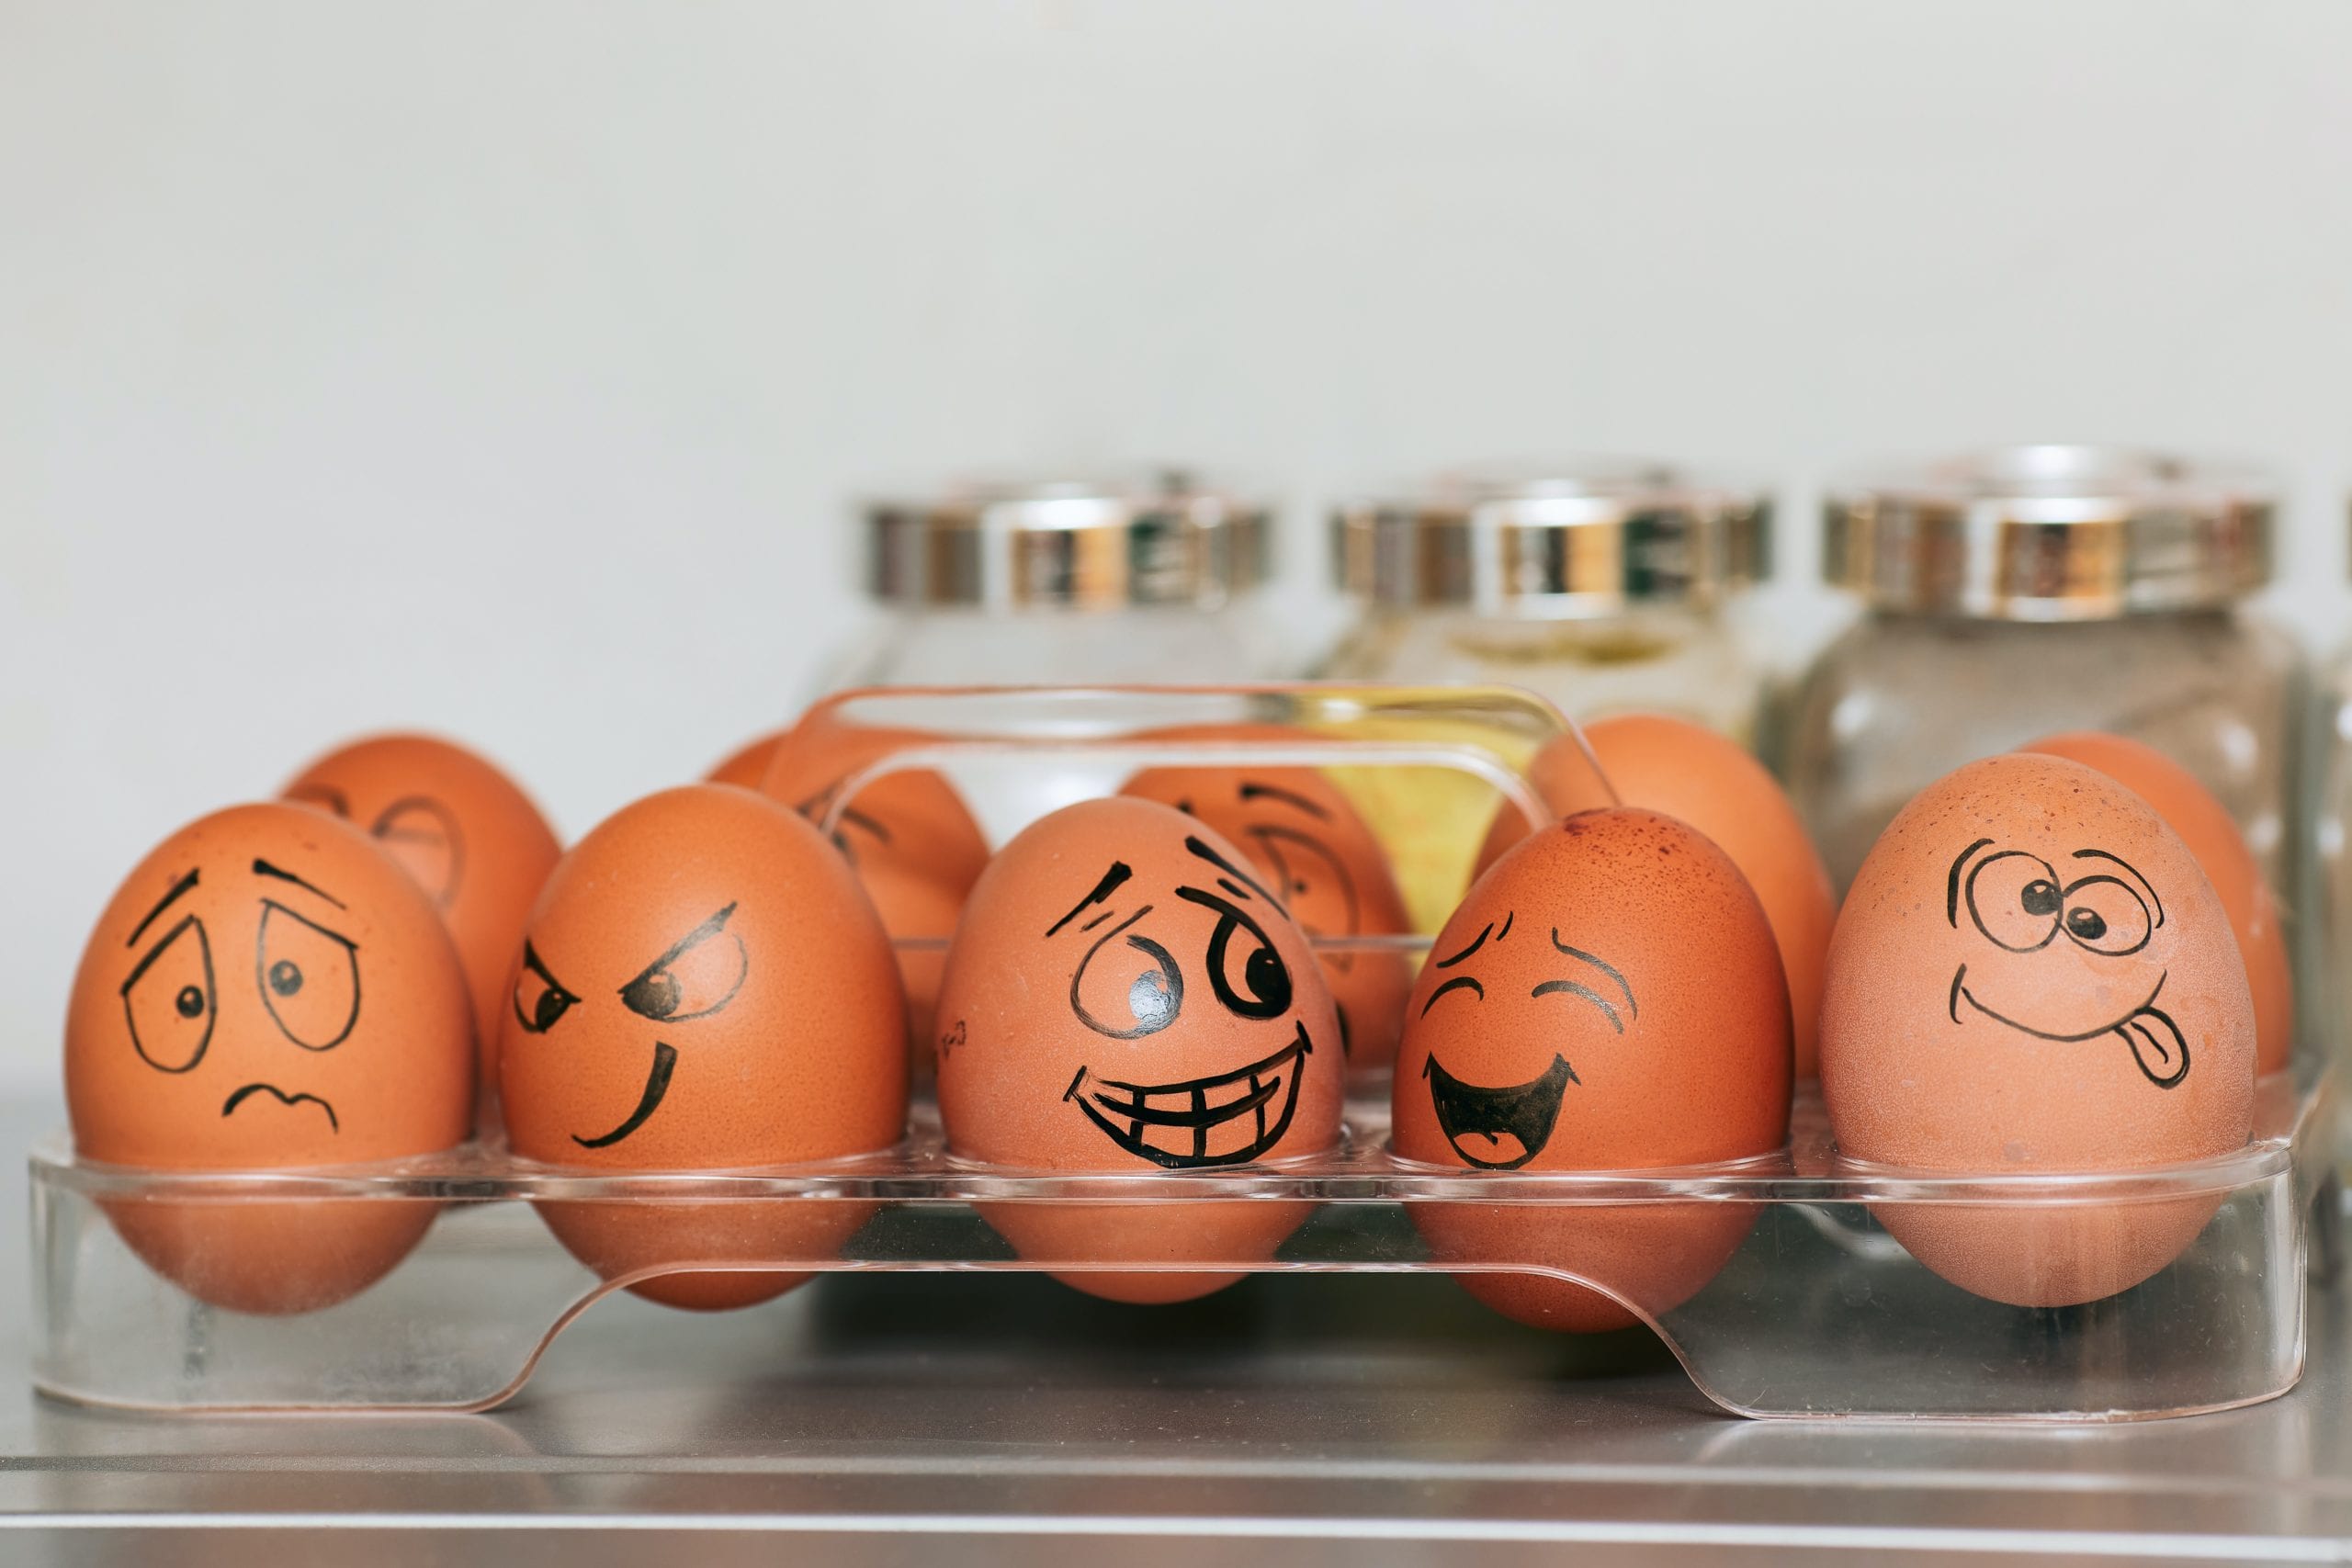 Does a Rotten Eggs Smell or Cabbage Smell Mean a Gas Leak?